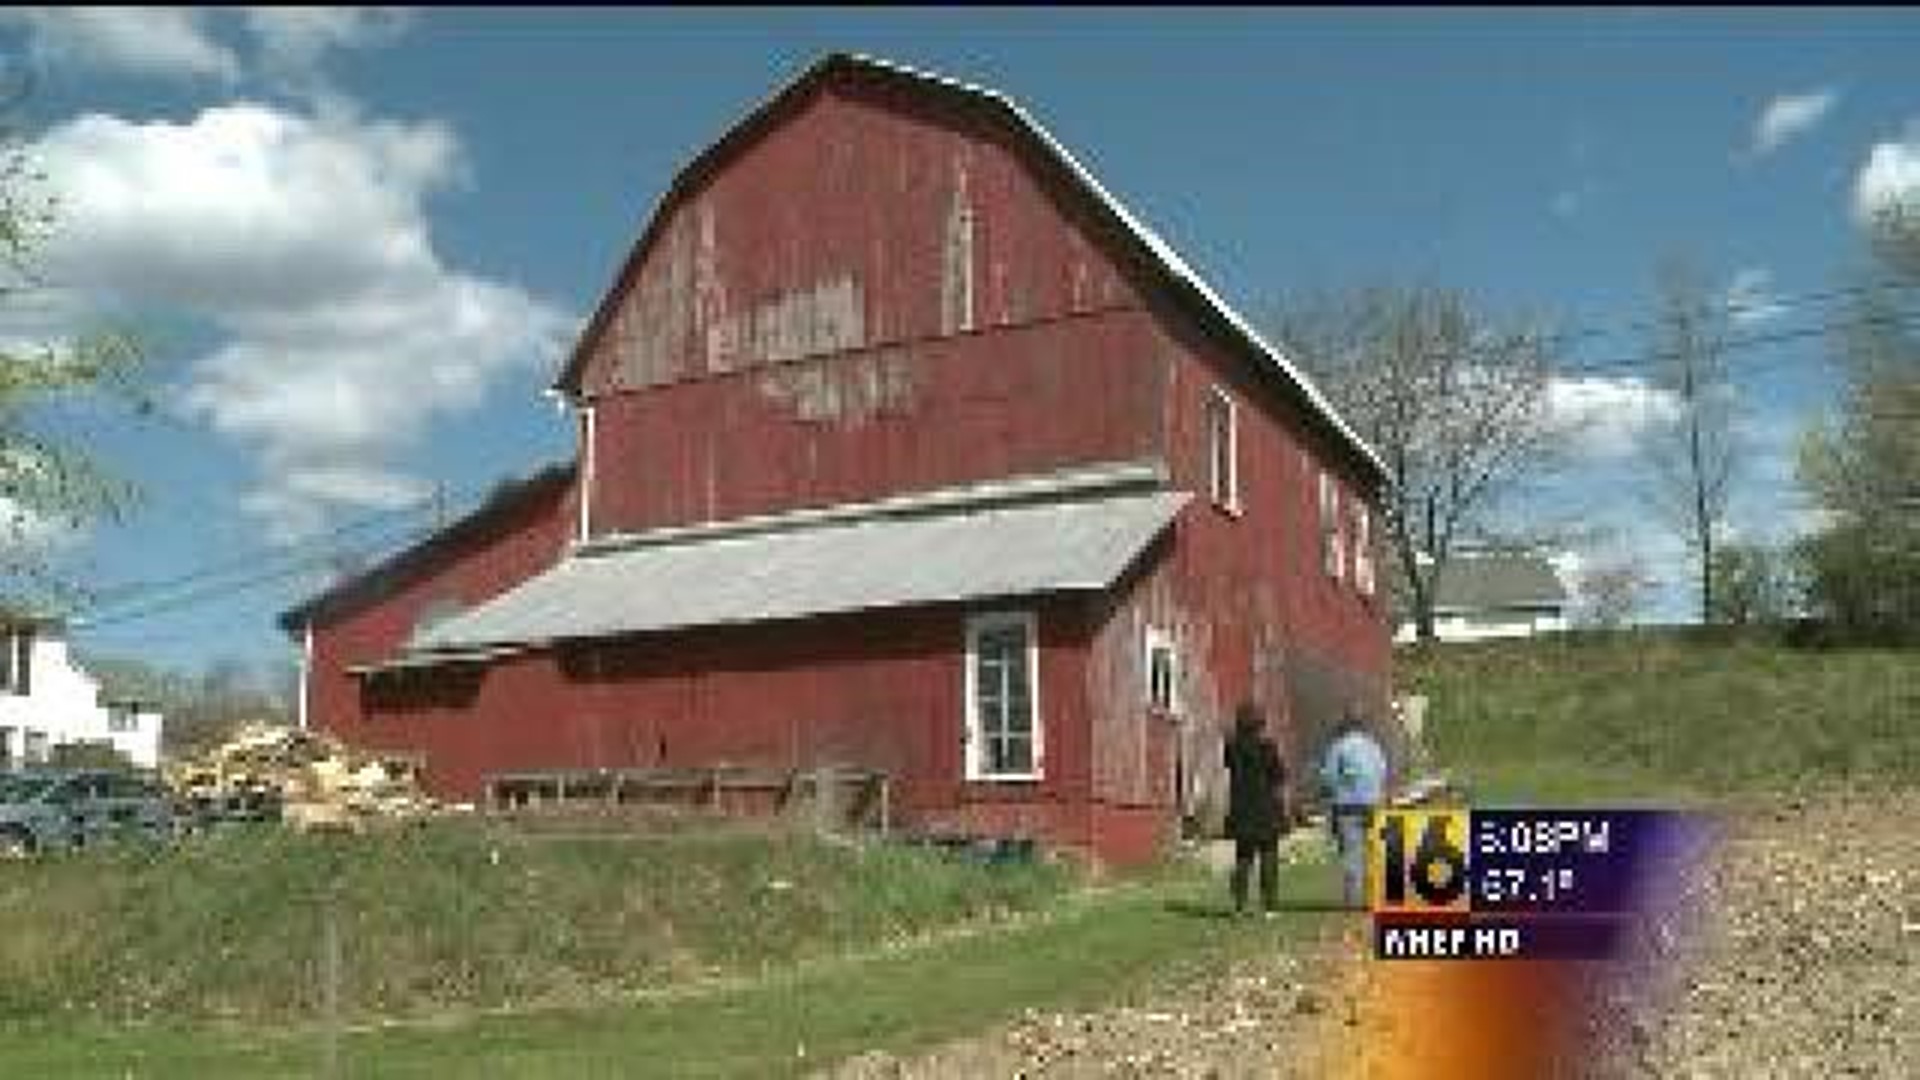 Vehicle Takes Out Barn Wall